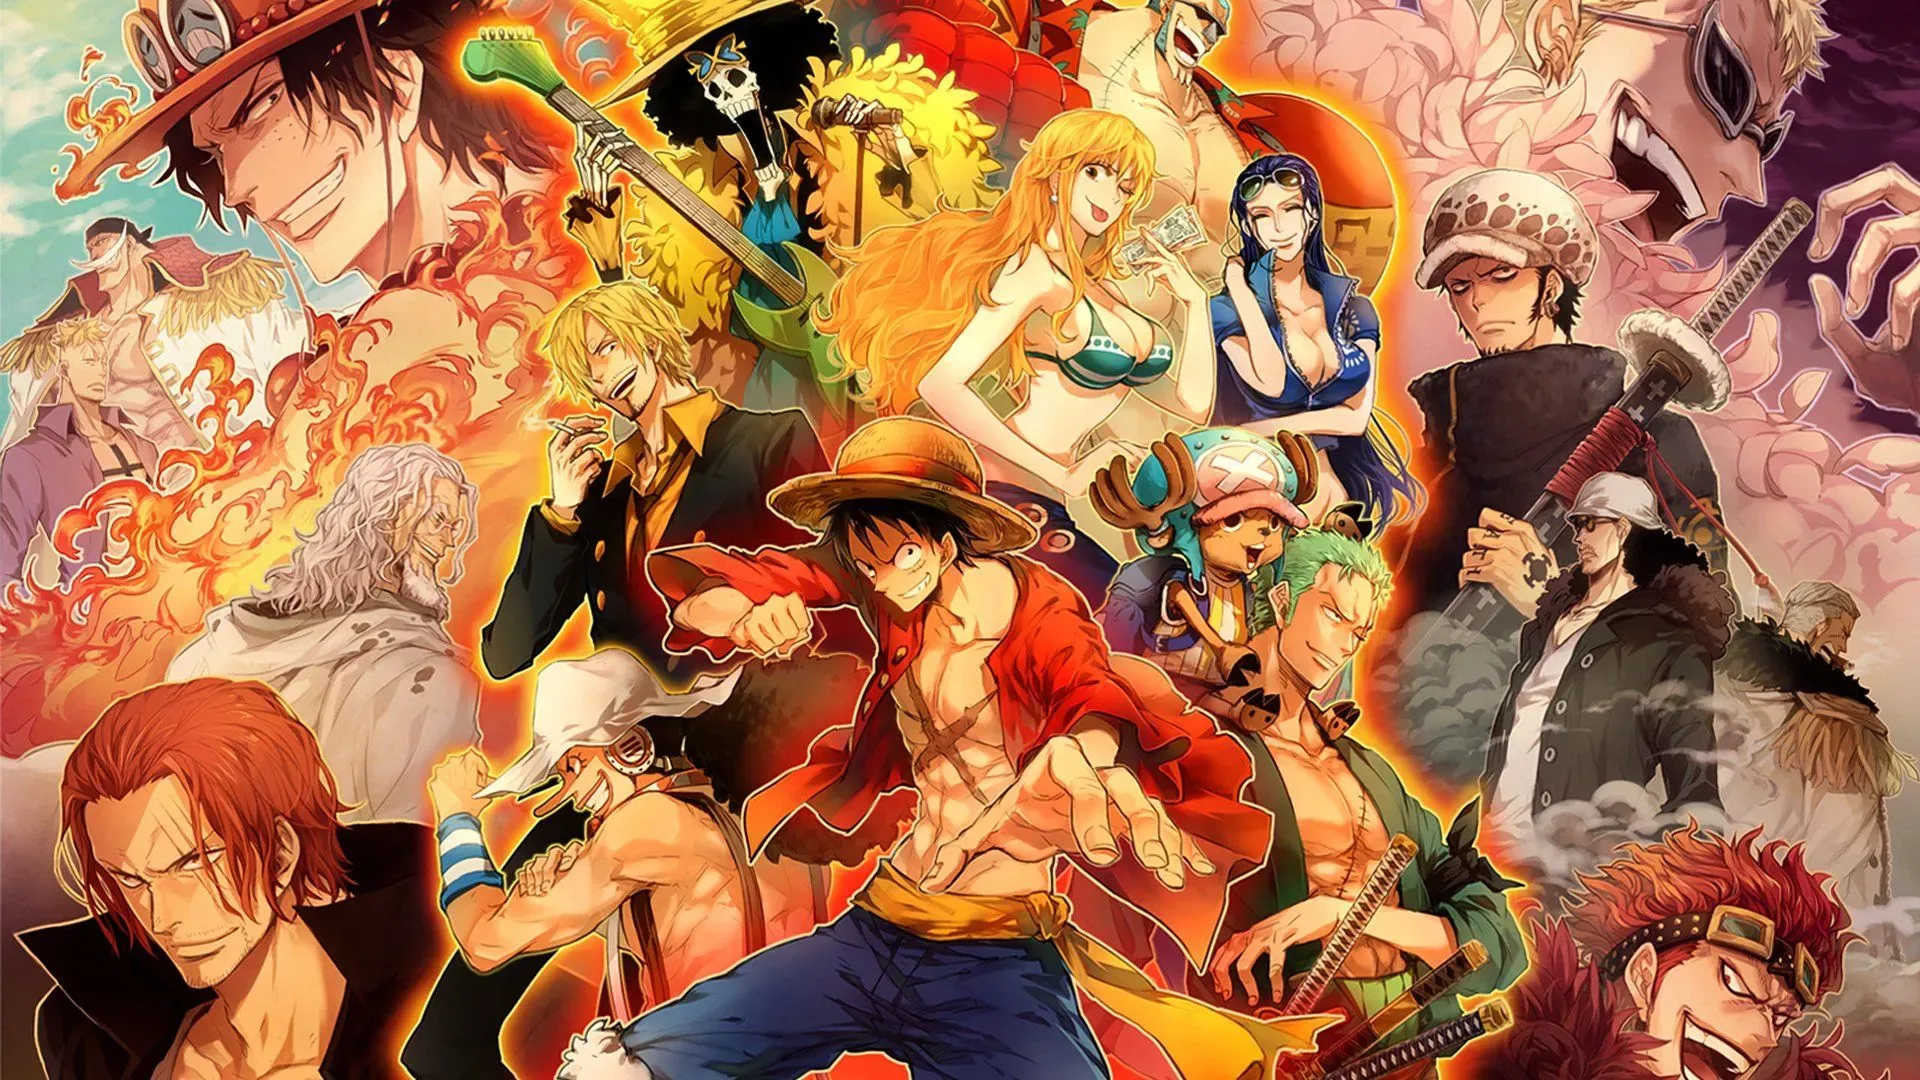 The Creation of One Piece